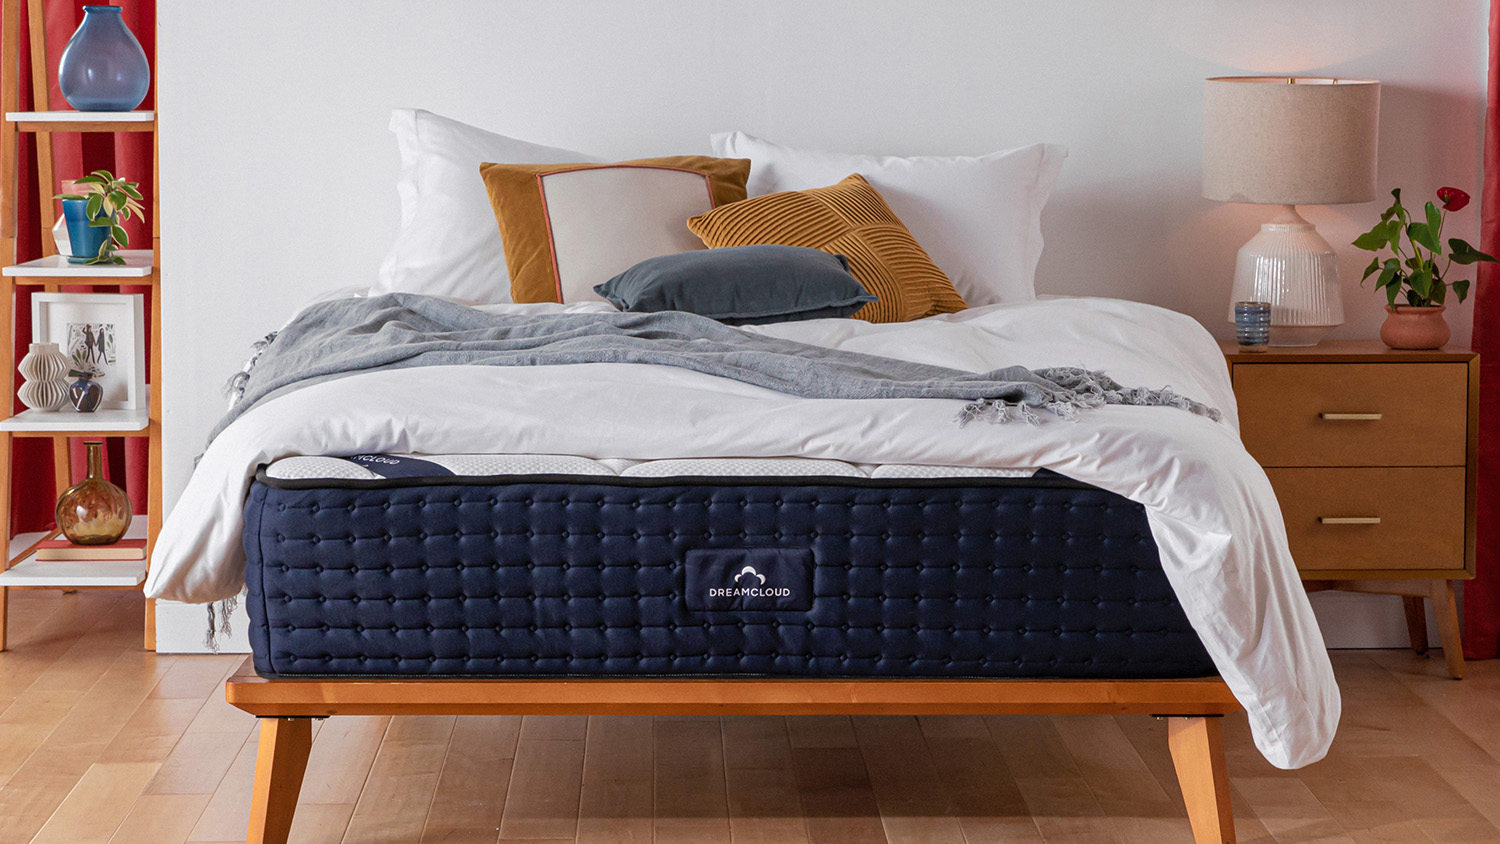 The DreamCloud Luxury Hybrid Mattress placed on a wooden bed frame in a white bedroom